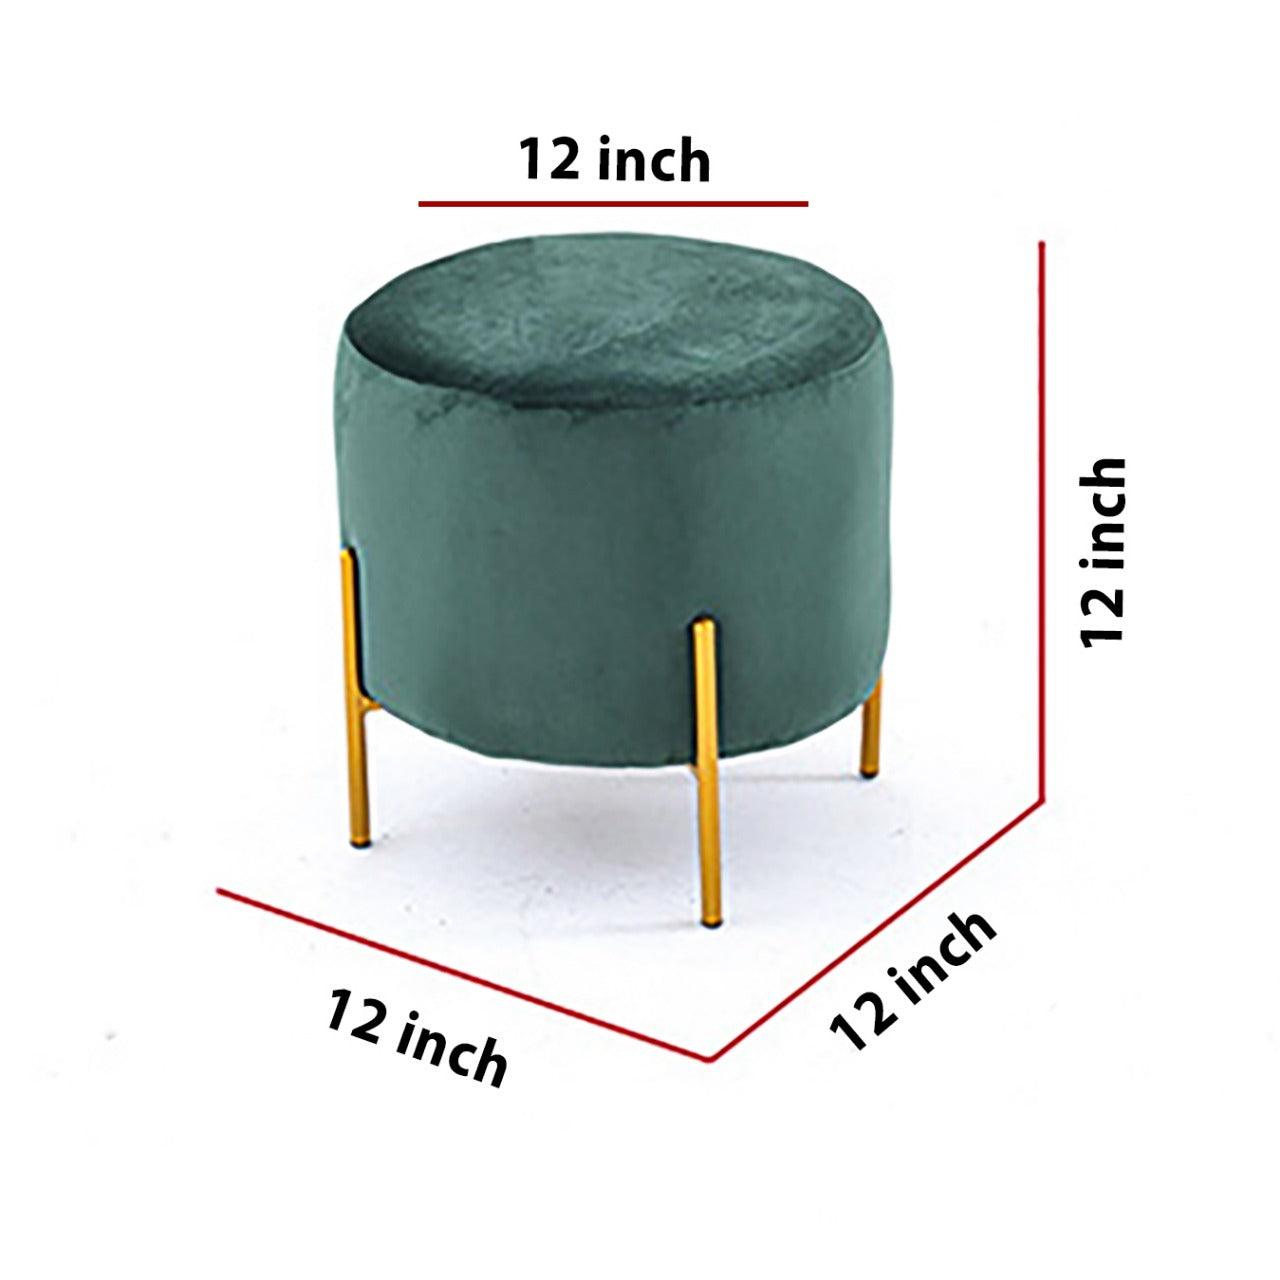 Wooden stool Round shape With Steel Stand - 159 - 92Bedding